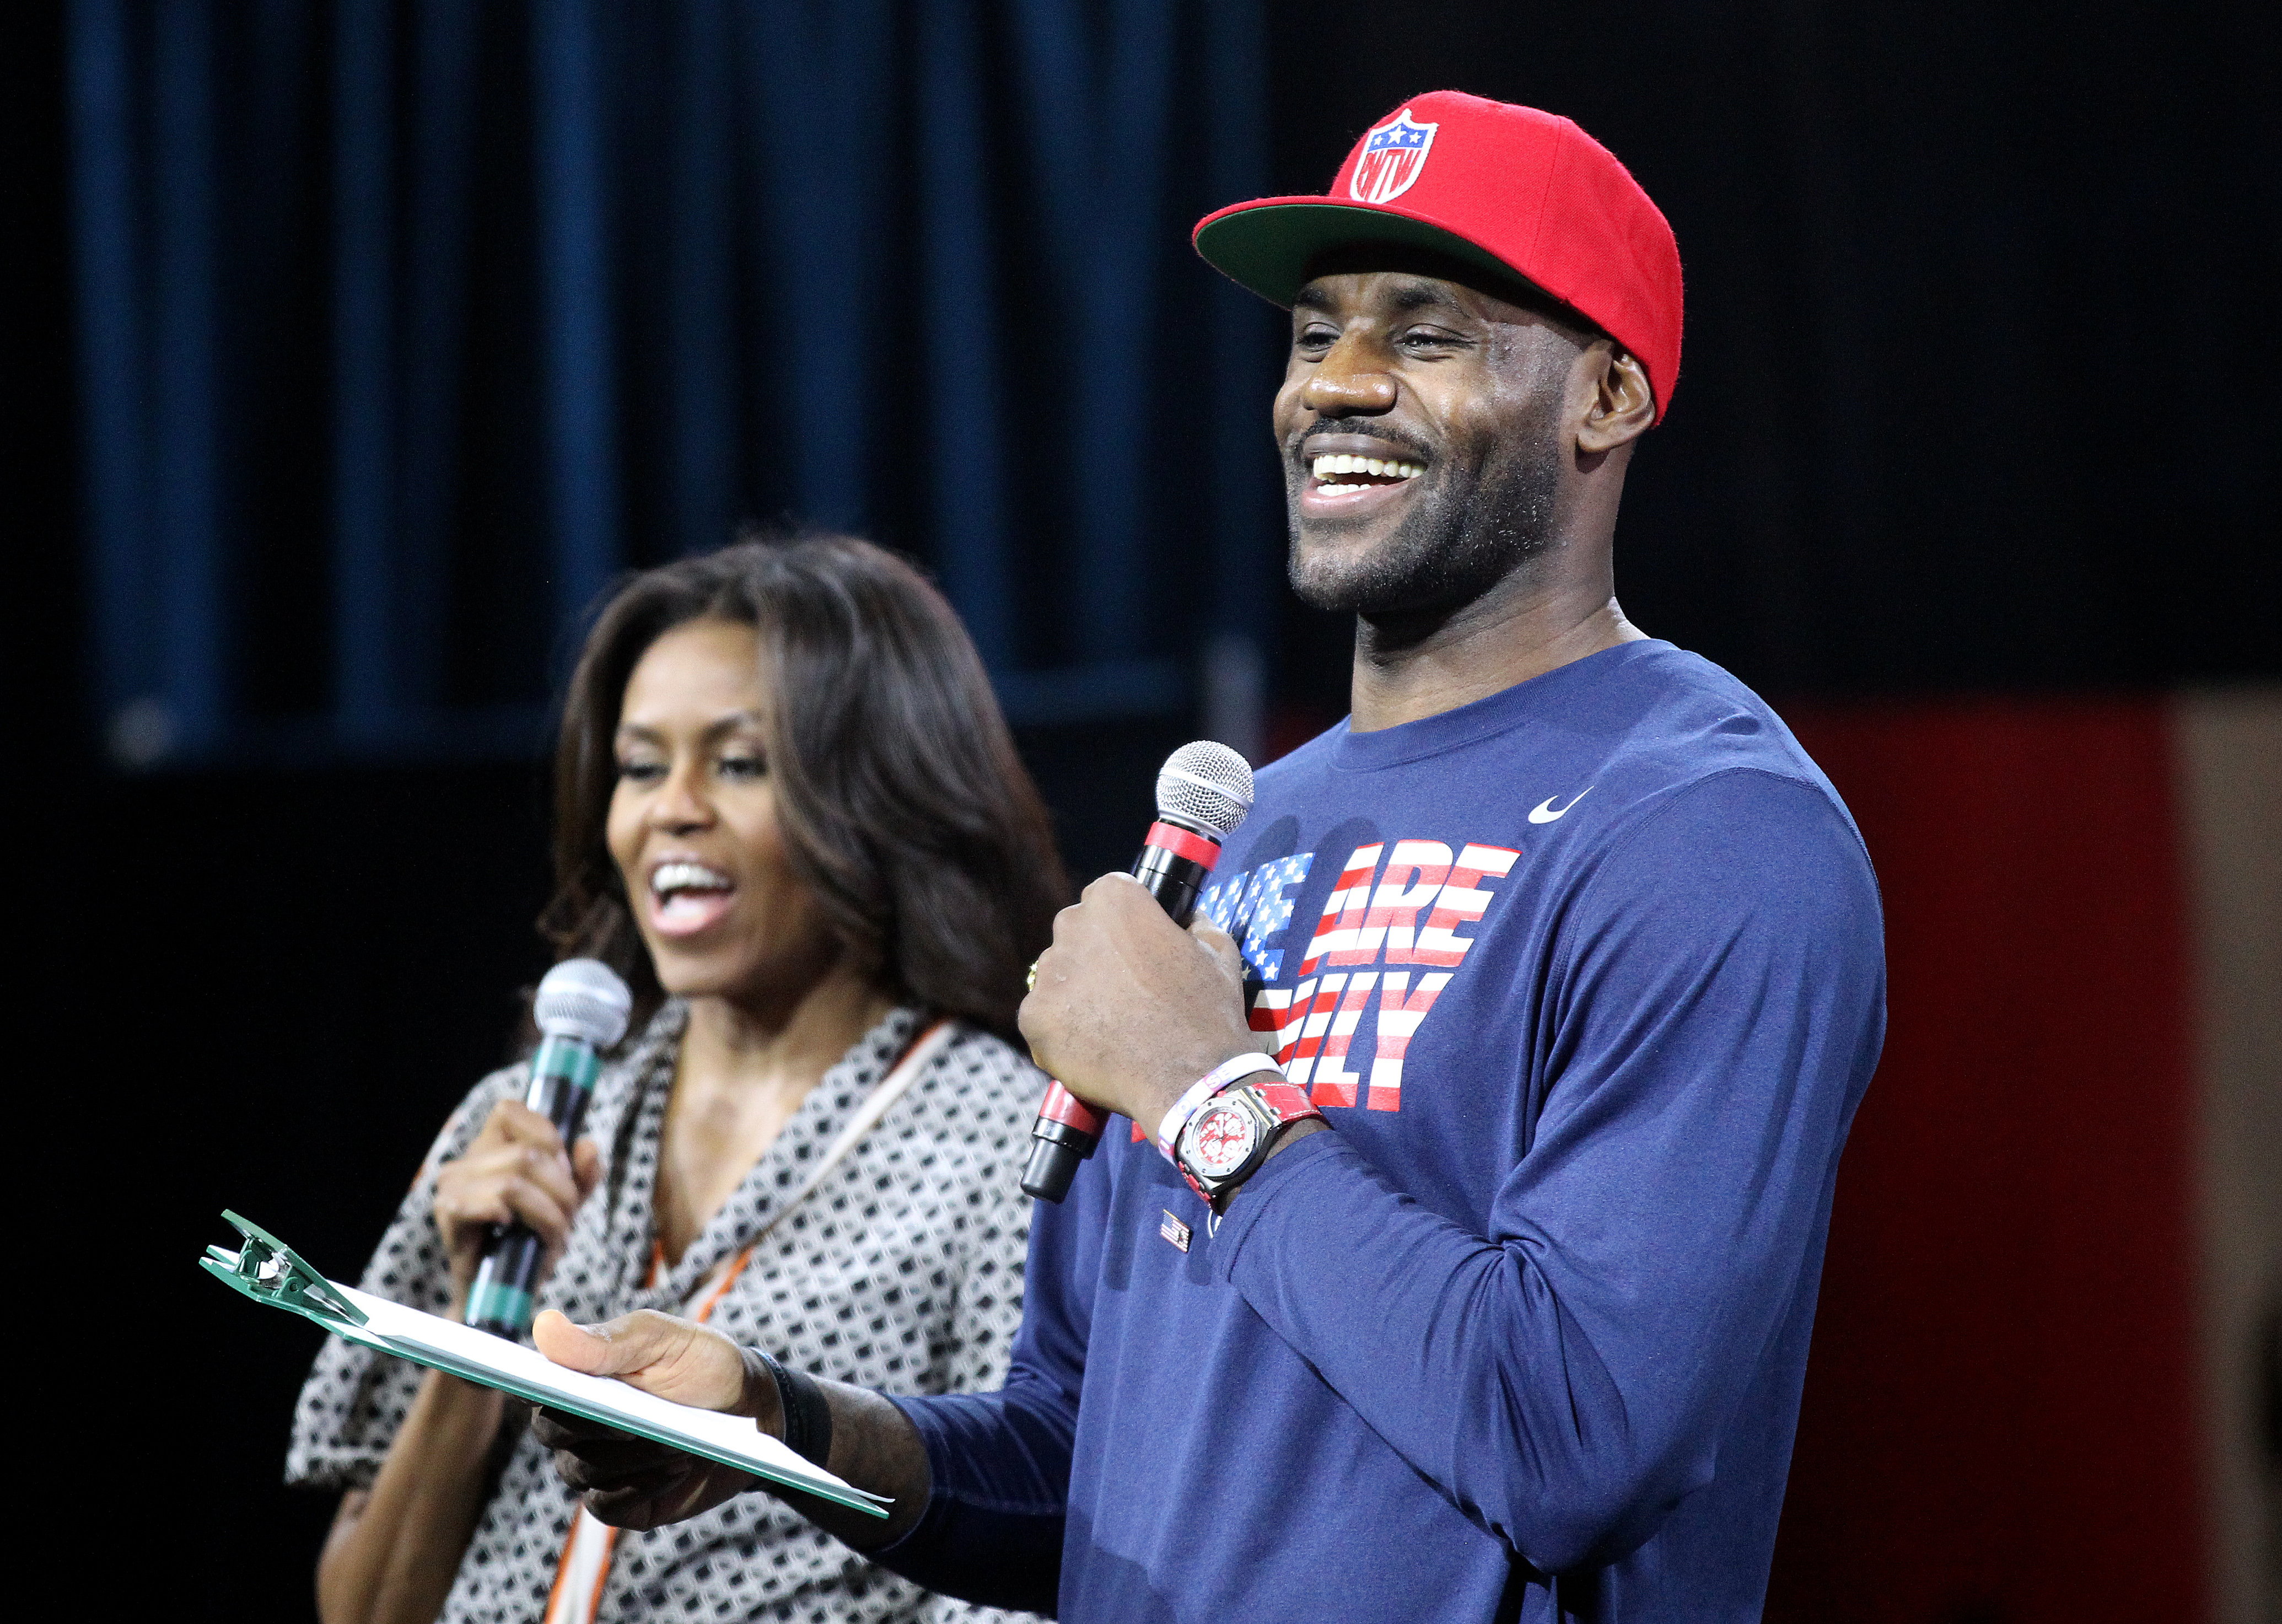 Cleveland Cavalier LeBron James, joined by First Lady Michelle Obama, reads a pledge to students from the LeBron James Family FoundationÕs Wheels for Education and Akron I PROMISE Network programs at the James A. Rhodes Arena at the University of Akron on Wednesday, Oct. 21, 2015. As part of her Reach Higher efforts, the First Lady highlights the importance of post-secondary education. Earlier this year, the LeBron James Family Foundation and The University of Akron announced a financial commitment to cover college education for thousands of the programÕs qualified students. (Lisa DeJong/The Plain Dealer) 